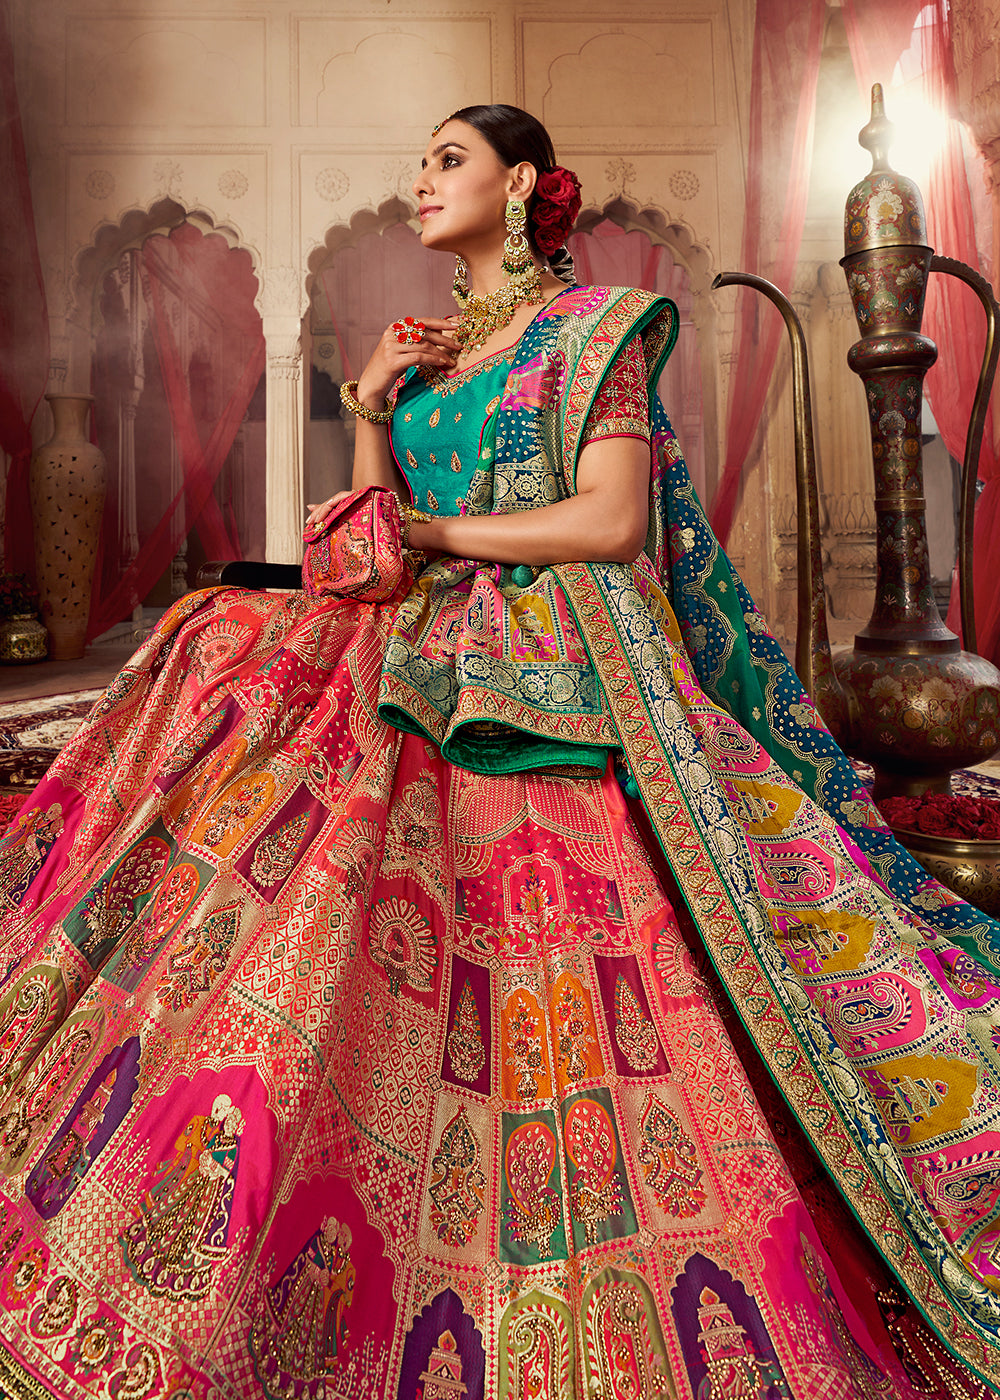 Buy Multi Color Lehenga Choli Online USA And Get Gorgeous Look ! Shop Now!